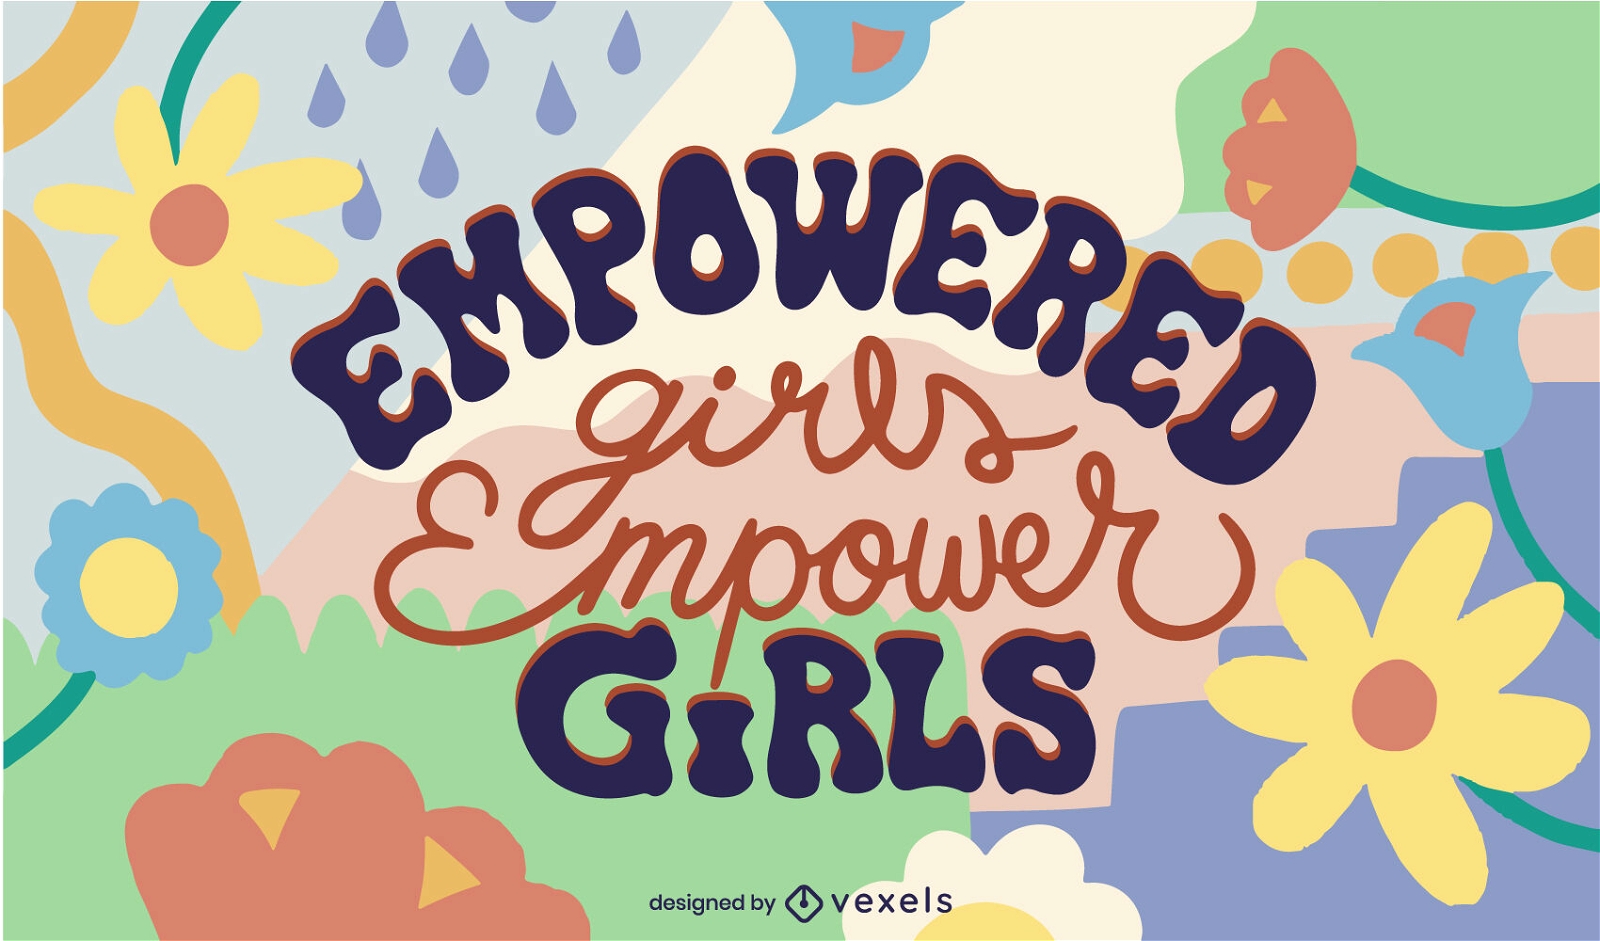 Empowered girls quote lettering